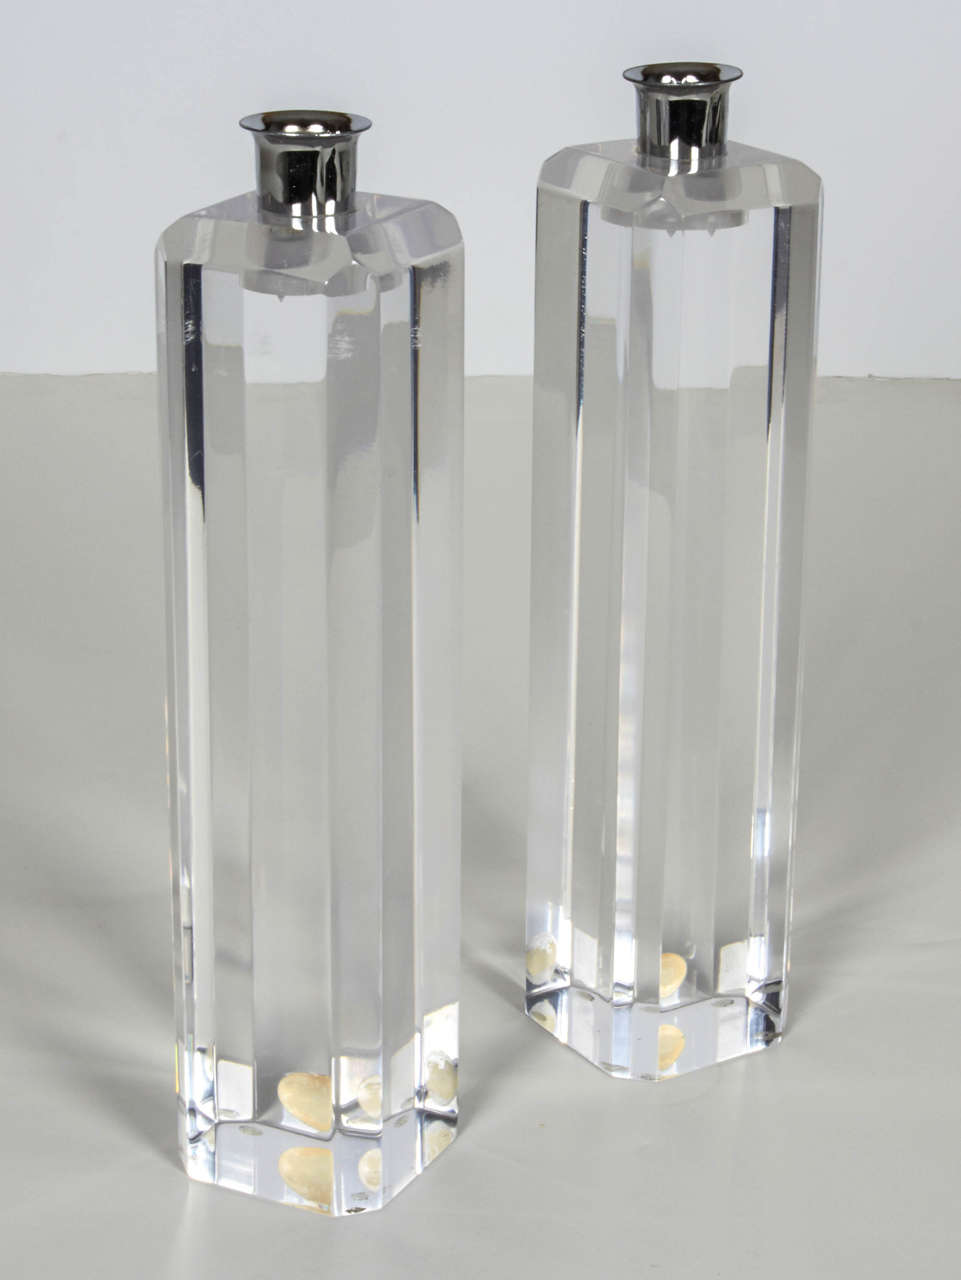 Pair of chic and sparkly, bevelled lucite candle stick holders with chrome trim. The holders have the original Ritts 